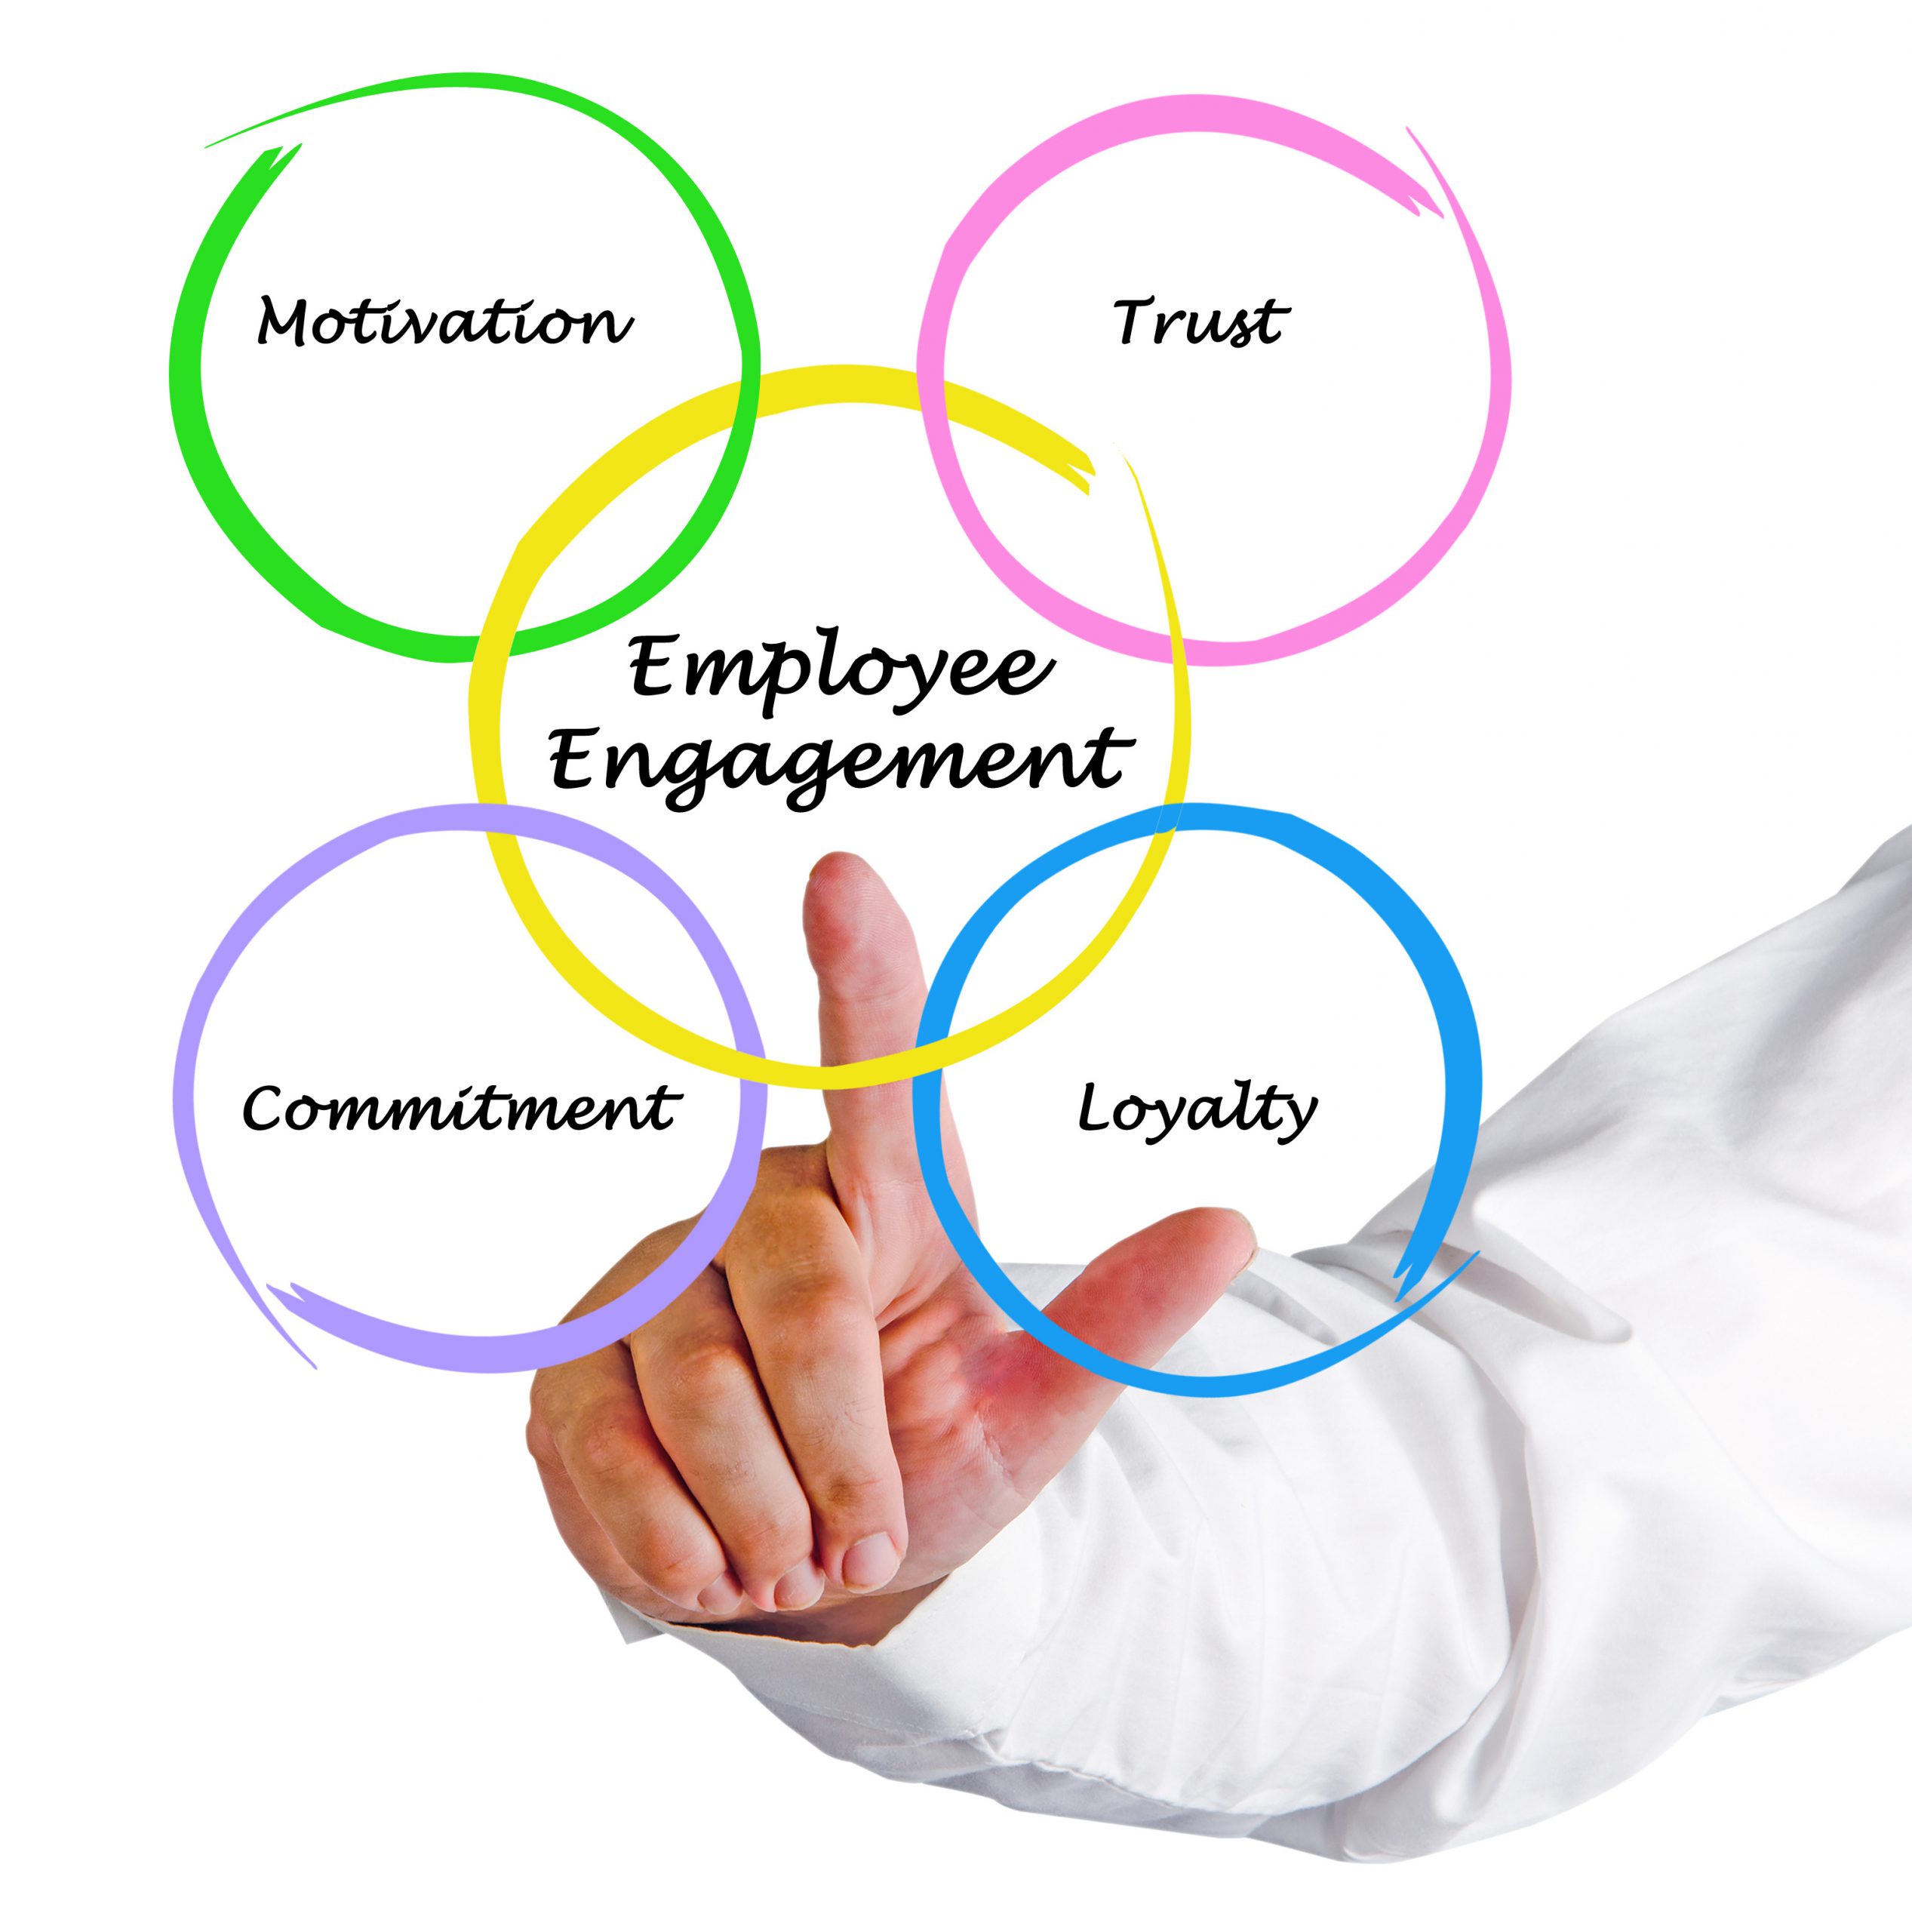 Employee engagement is crucial during the tough economic times